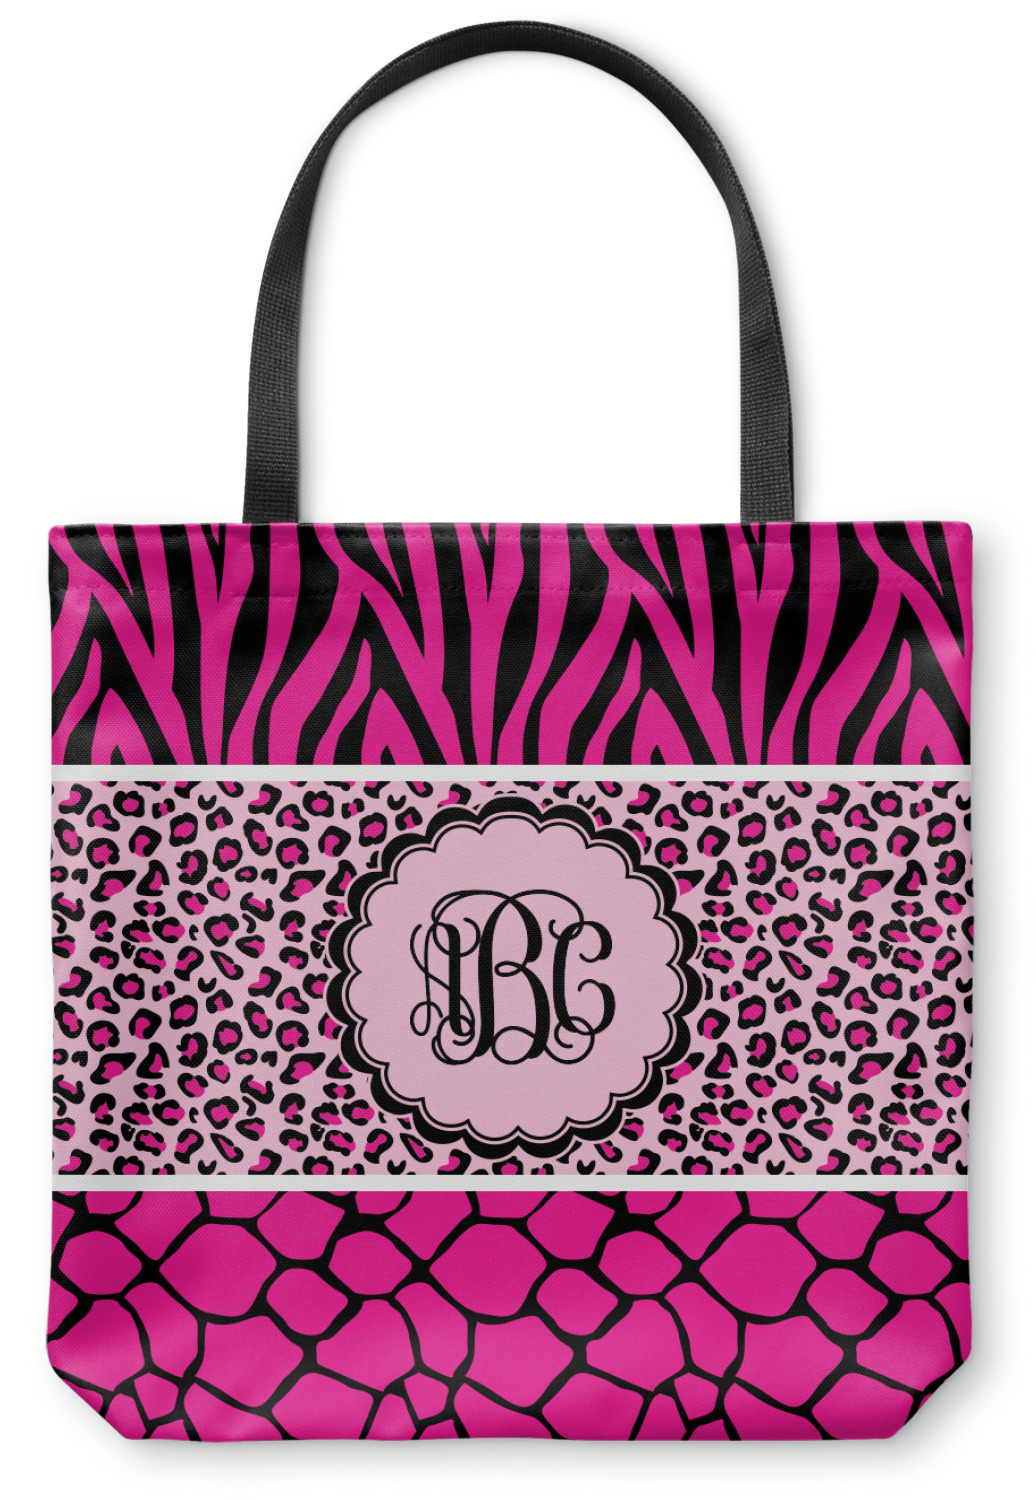 Triple Animal Print Canvas Tote Bag (Personalized) - YouCustomizeIt